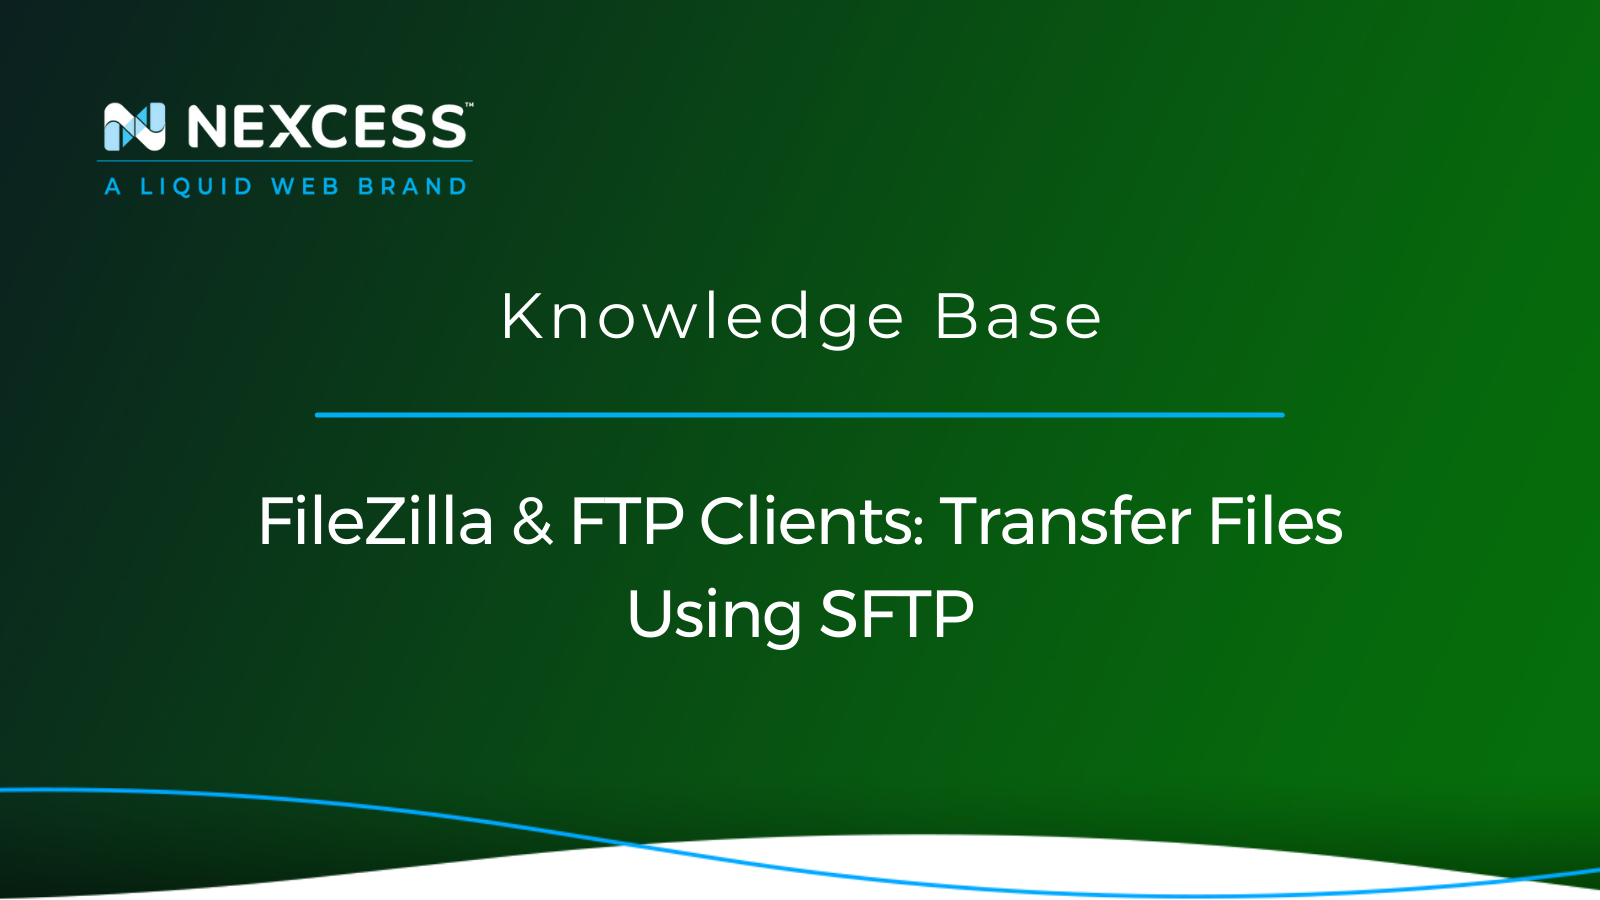 FileZilla & FTP Clients: Transfer Files Using SFTP